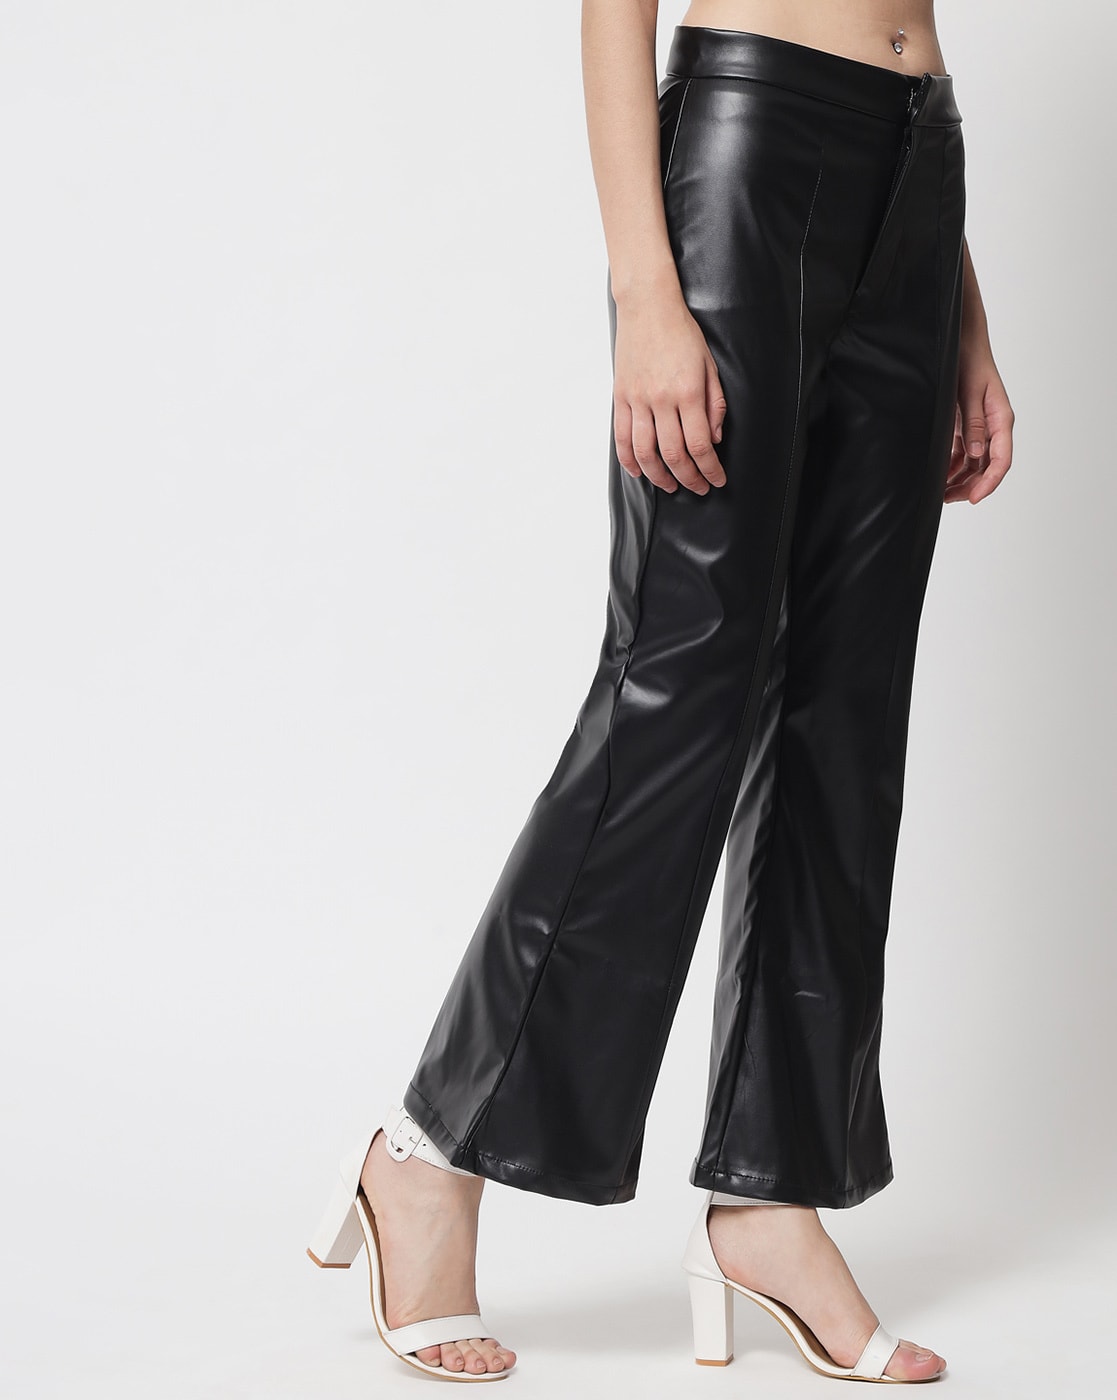 LIMITED COLLECTION Plus Size Black Faux Leather Trousers  Yours Clothing